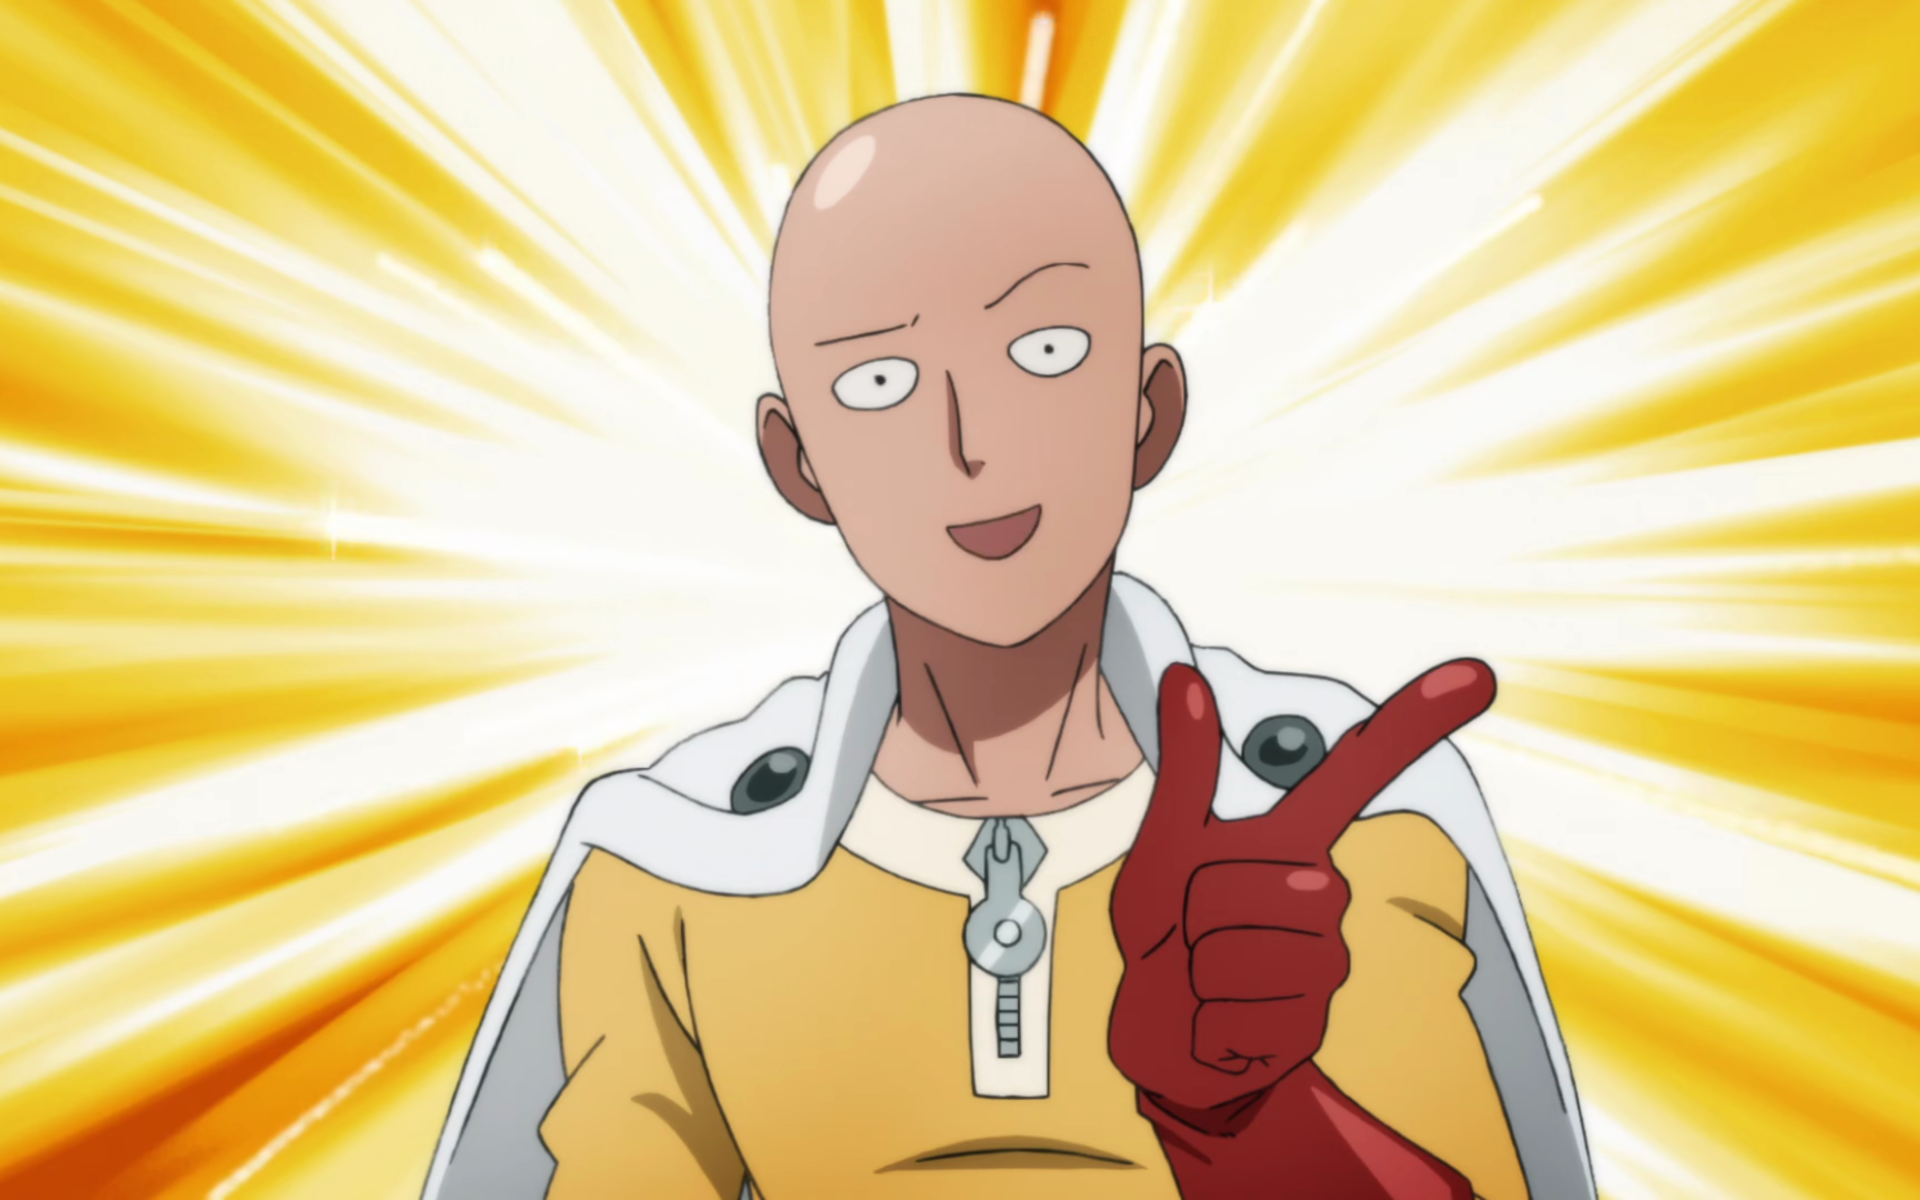 Anime picture one-punch man 1187x1680 452051 it